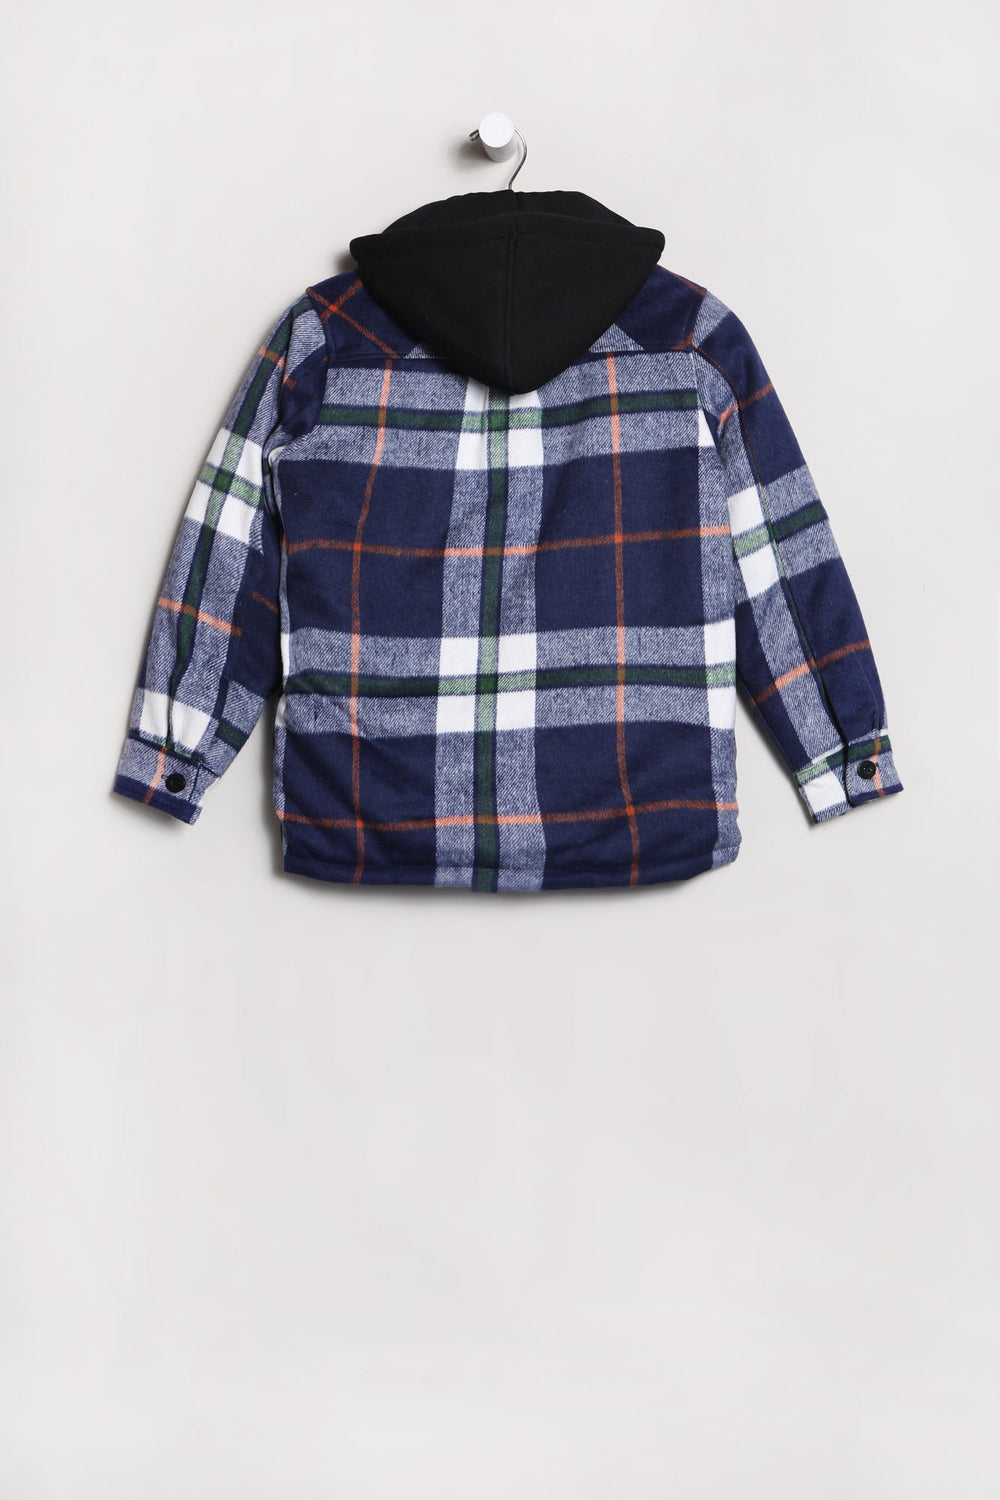 West49 Youth Lined Flannel Shacket Blue